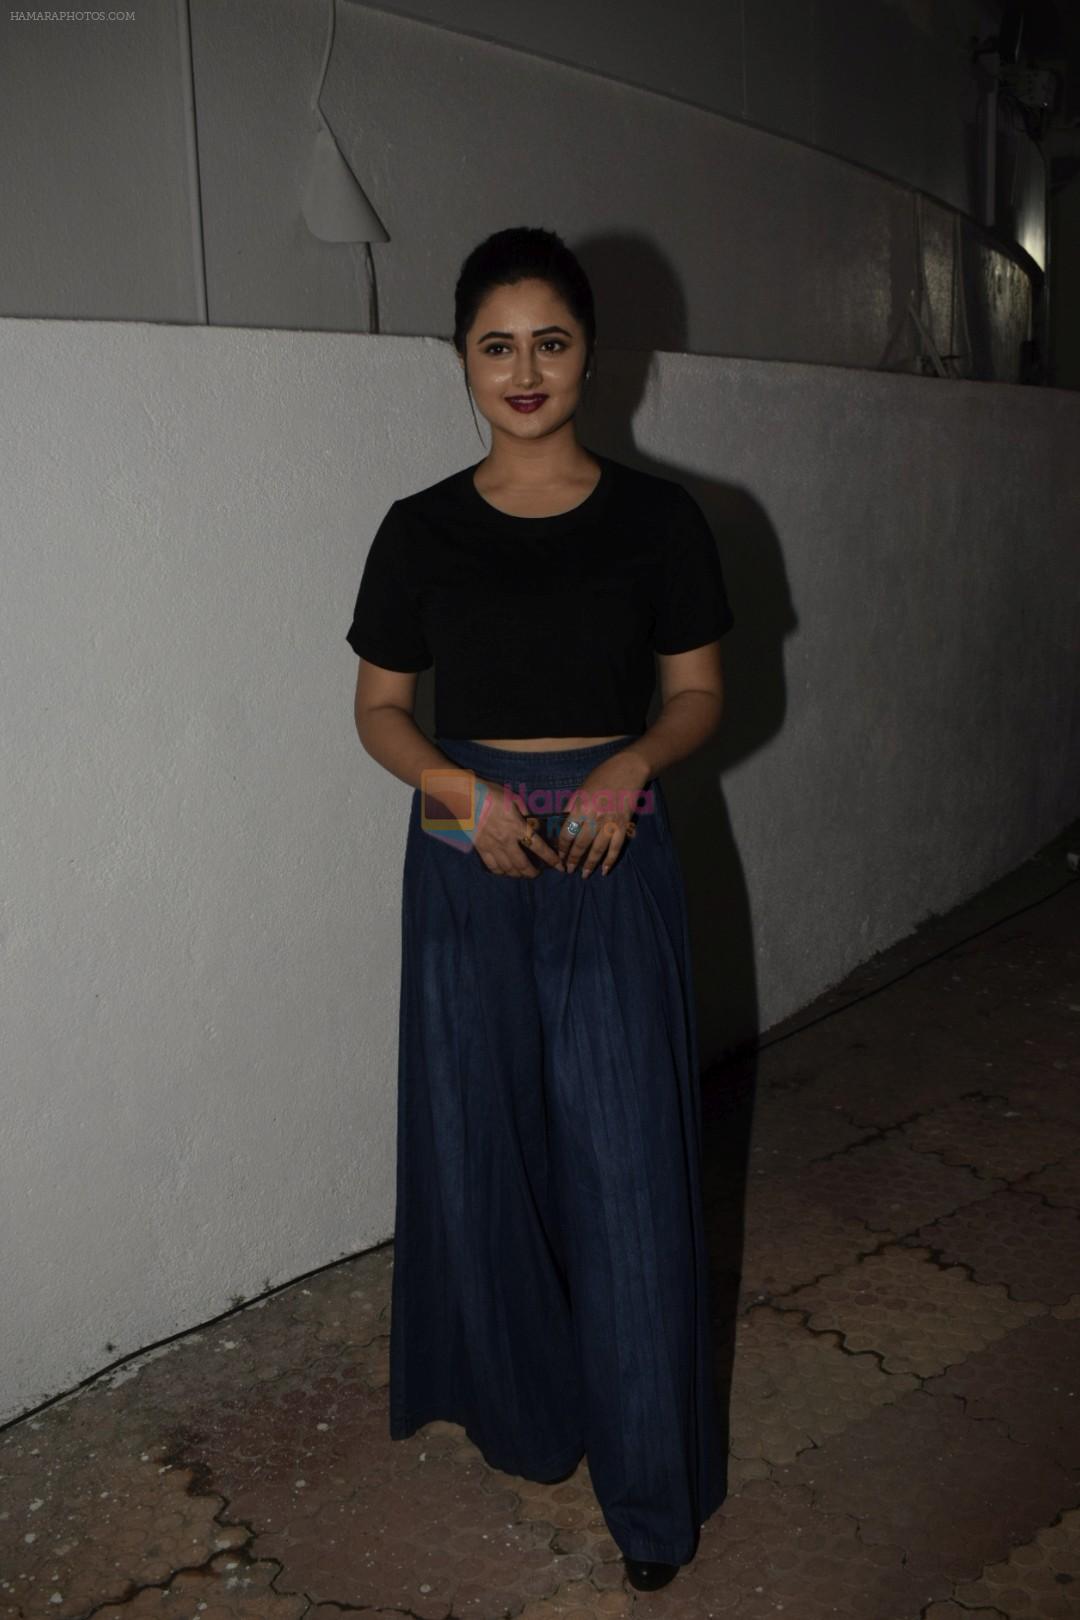 Rashmi Desai at India's first tennis premiere league at celebrations club in Andheri on 20th Oct 2018